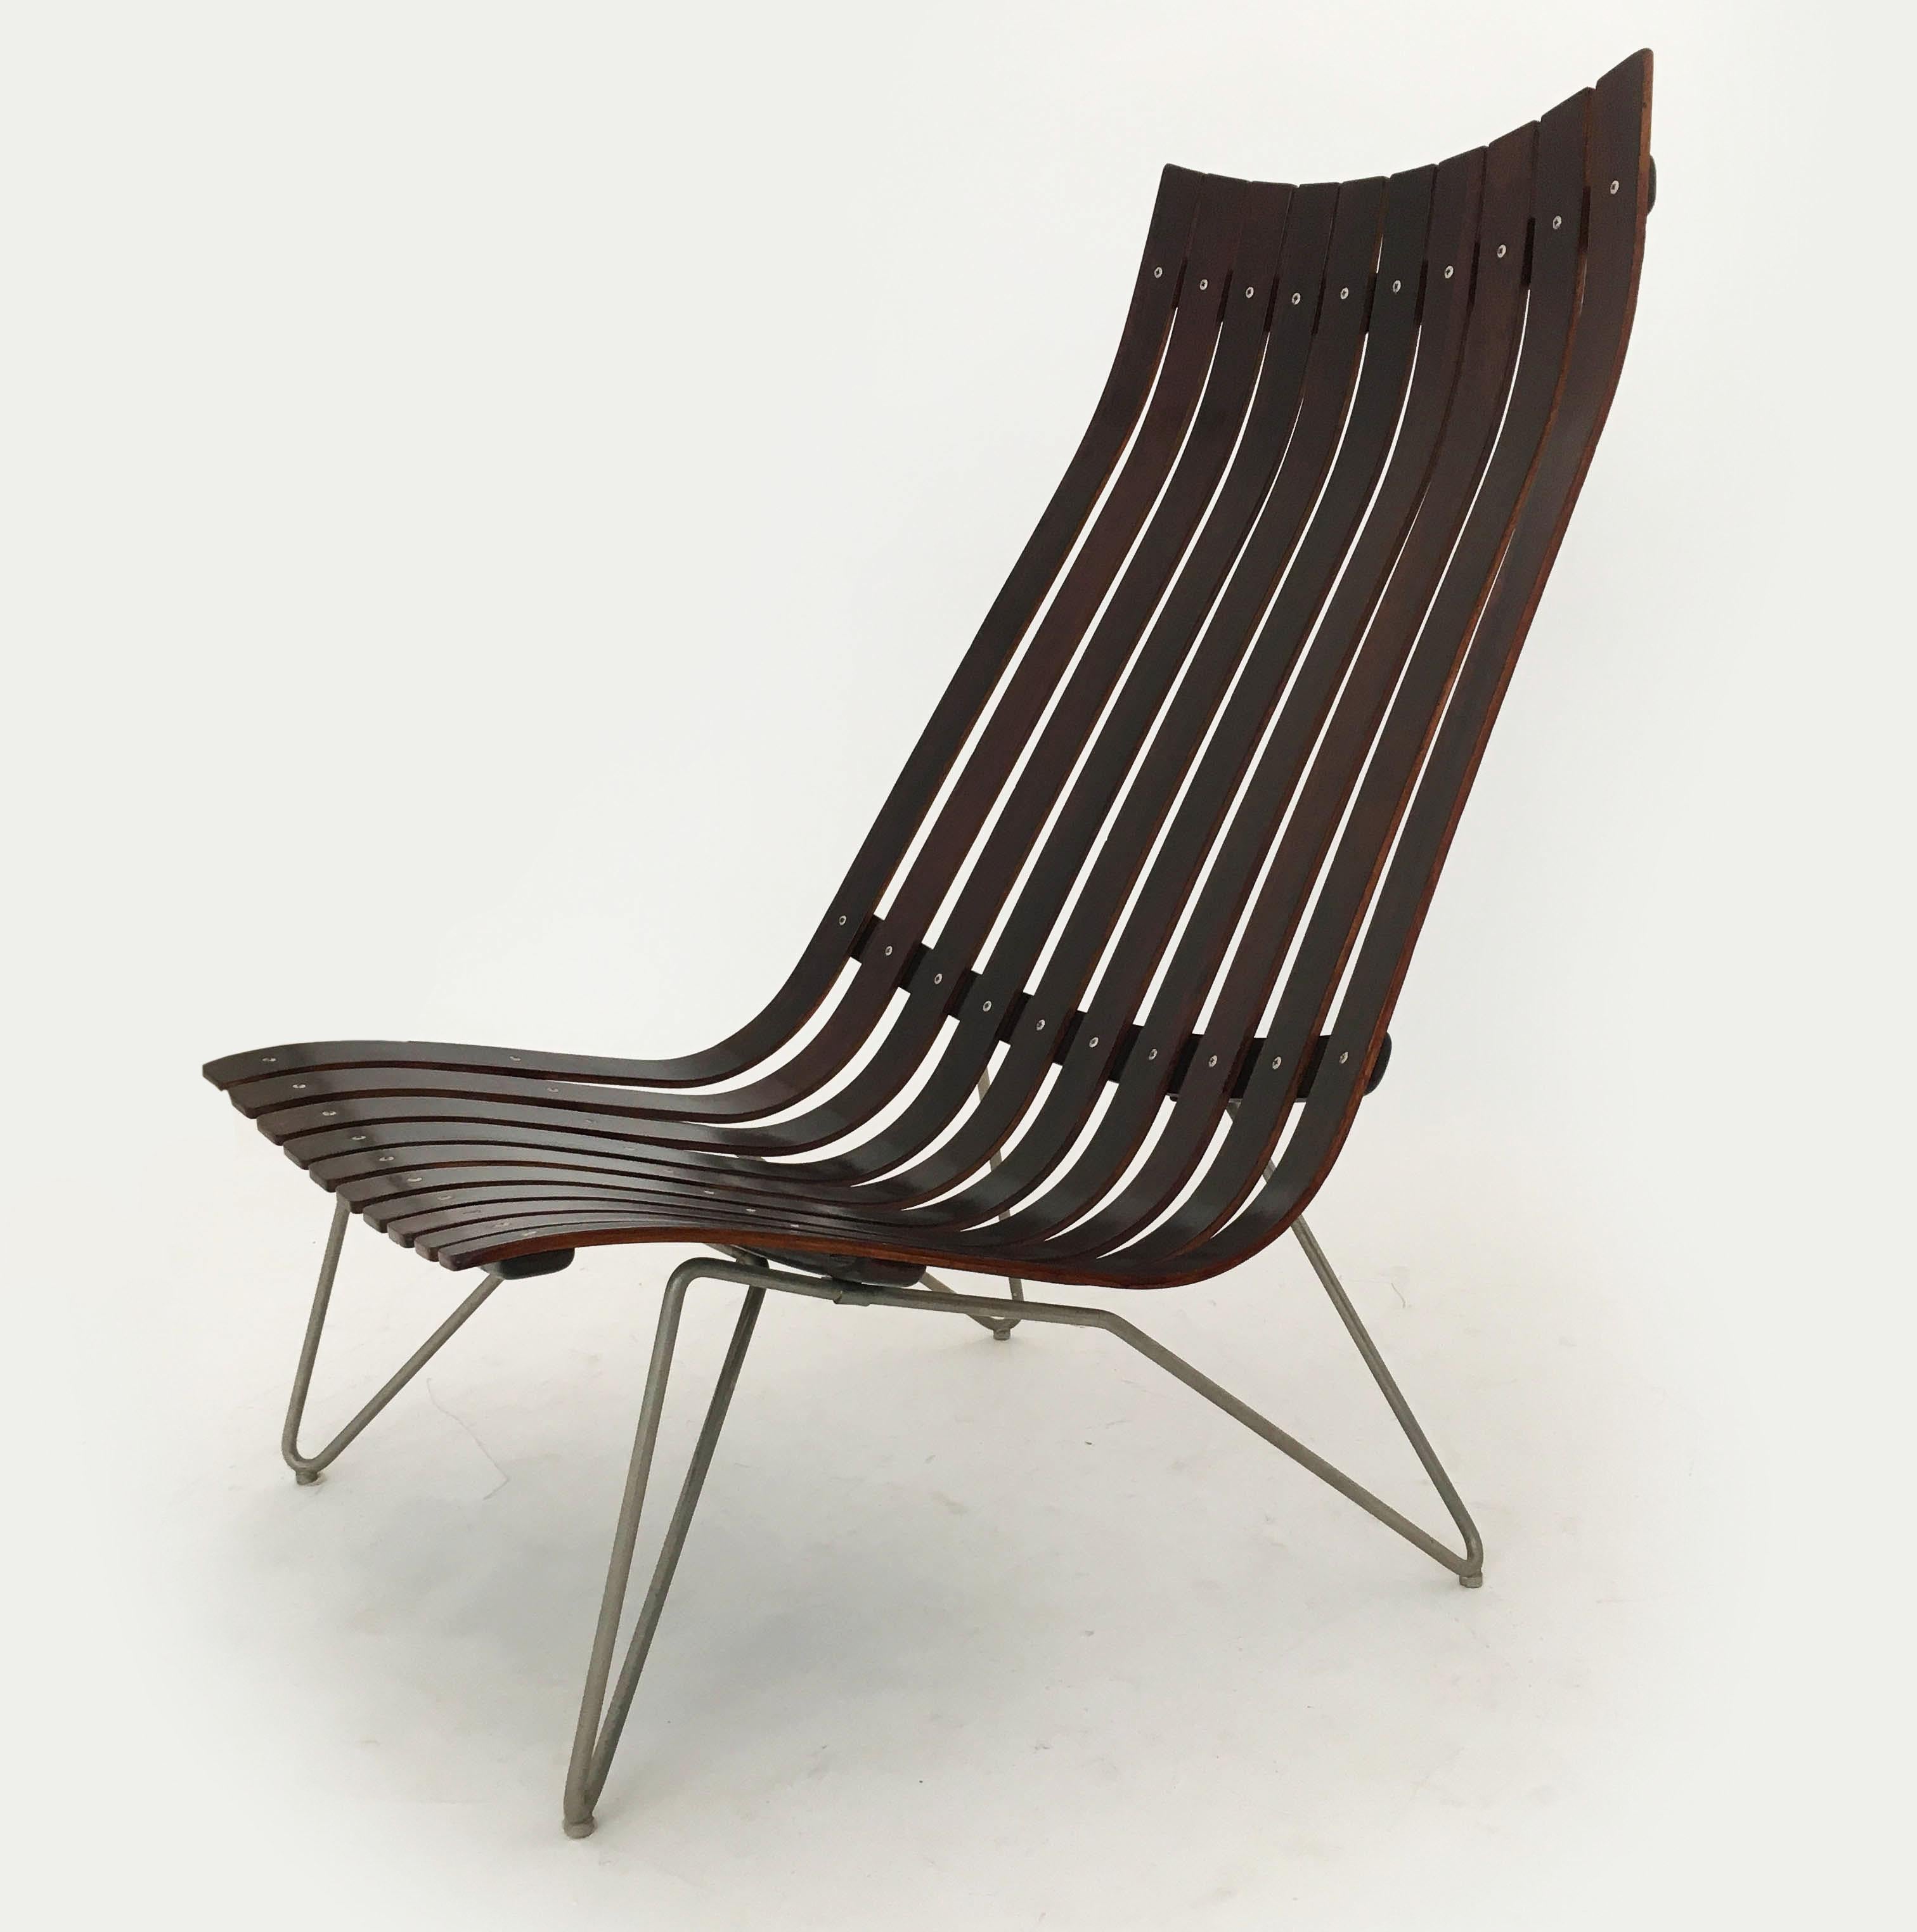 Hans Brattrud elegant and modern lounge chair model 'Scandia' by Hove Mobler, Norway 1950s. A unique and timeless seating option.